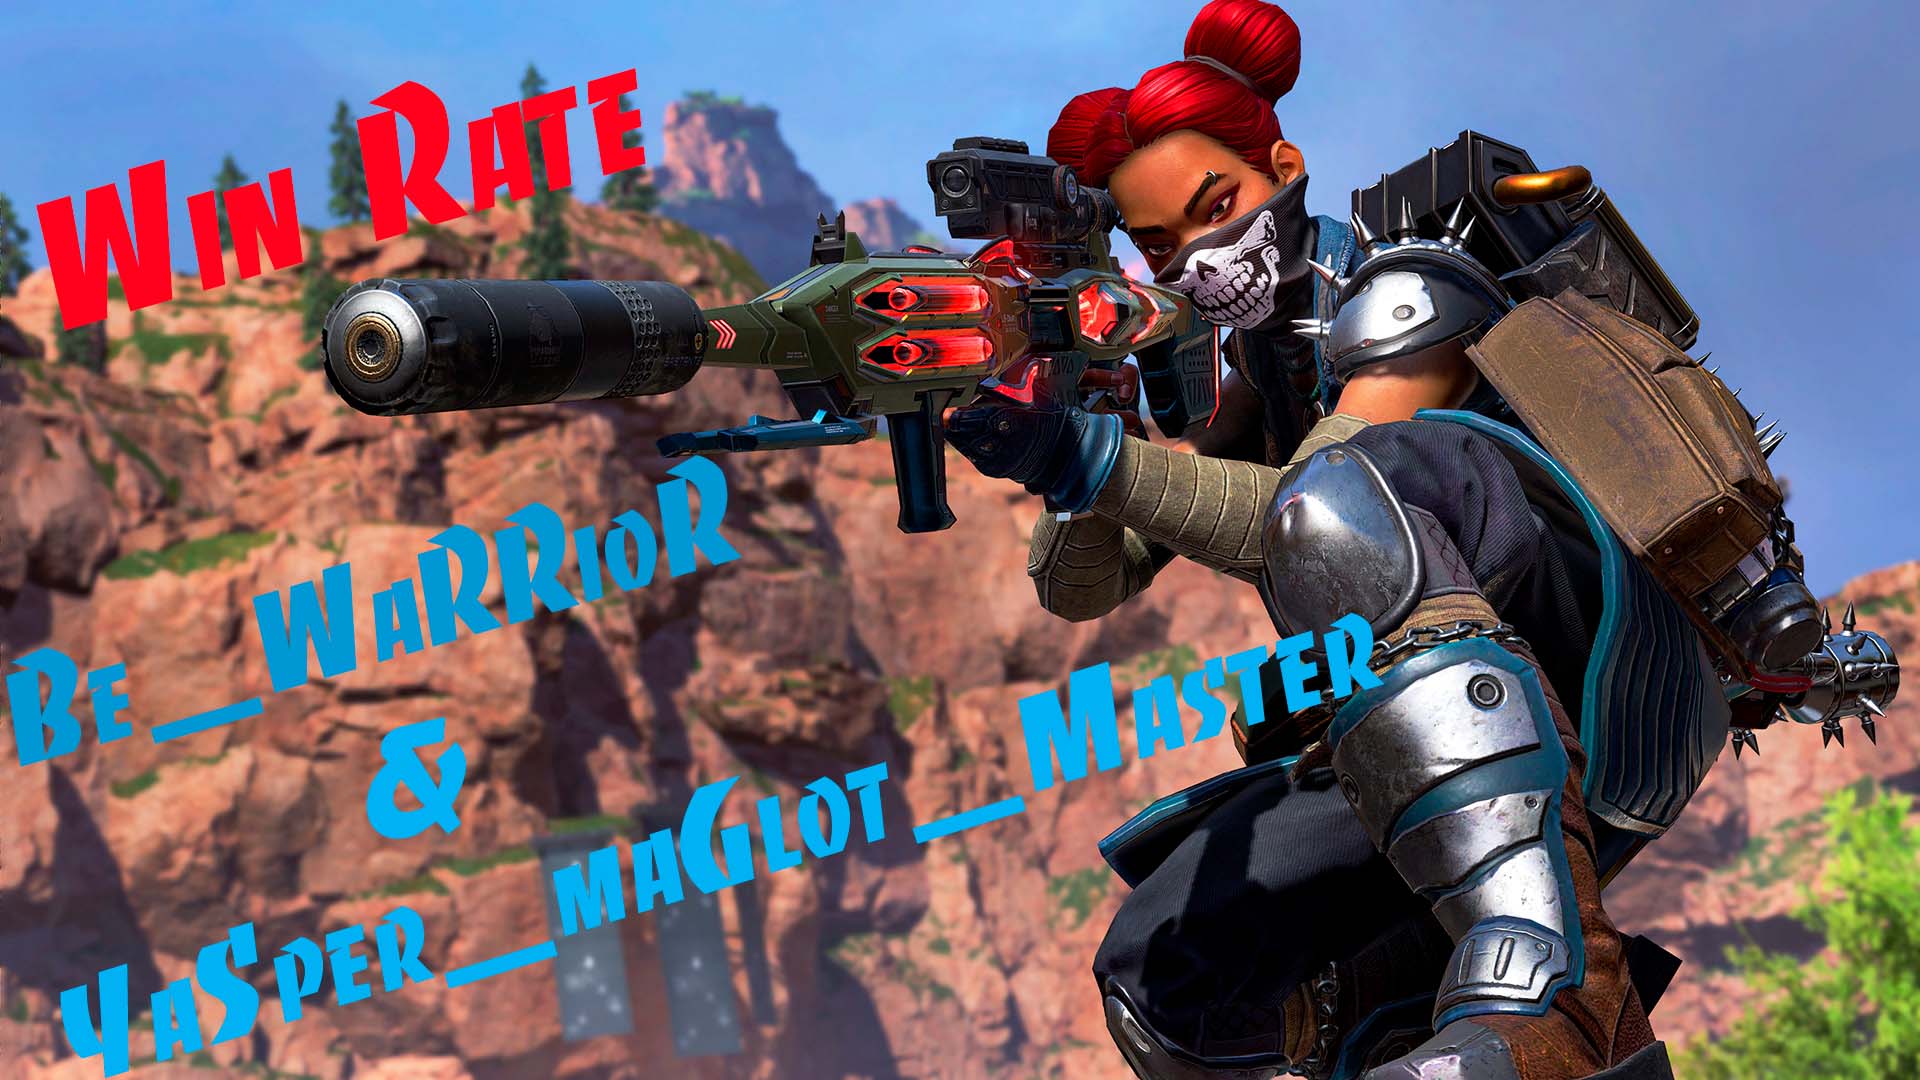 Be_WaRRioR Win Rate With Ya.spe.GloT.Master #shortvideo #apexlegends #shorts #shortsvideo #apex